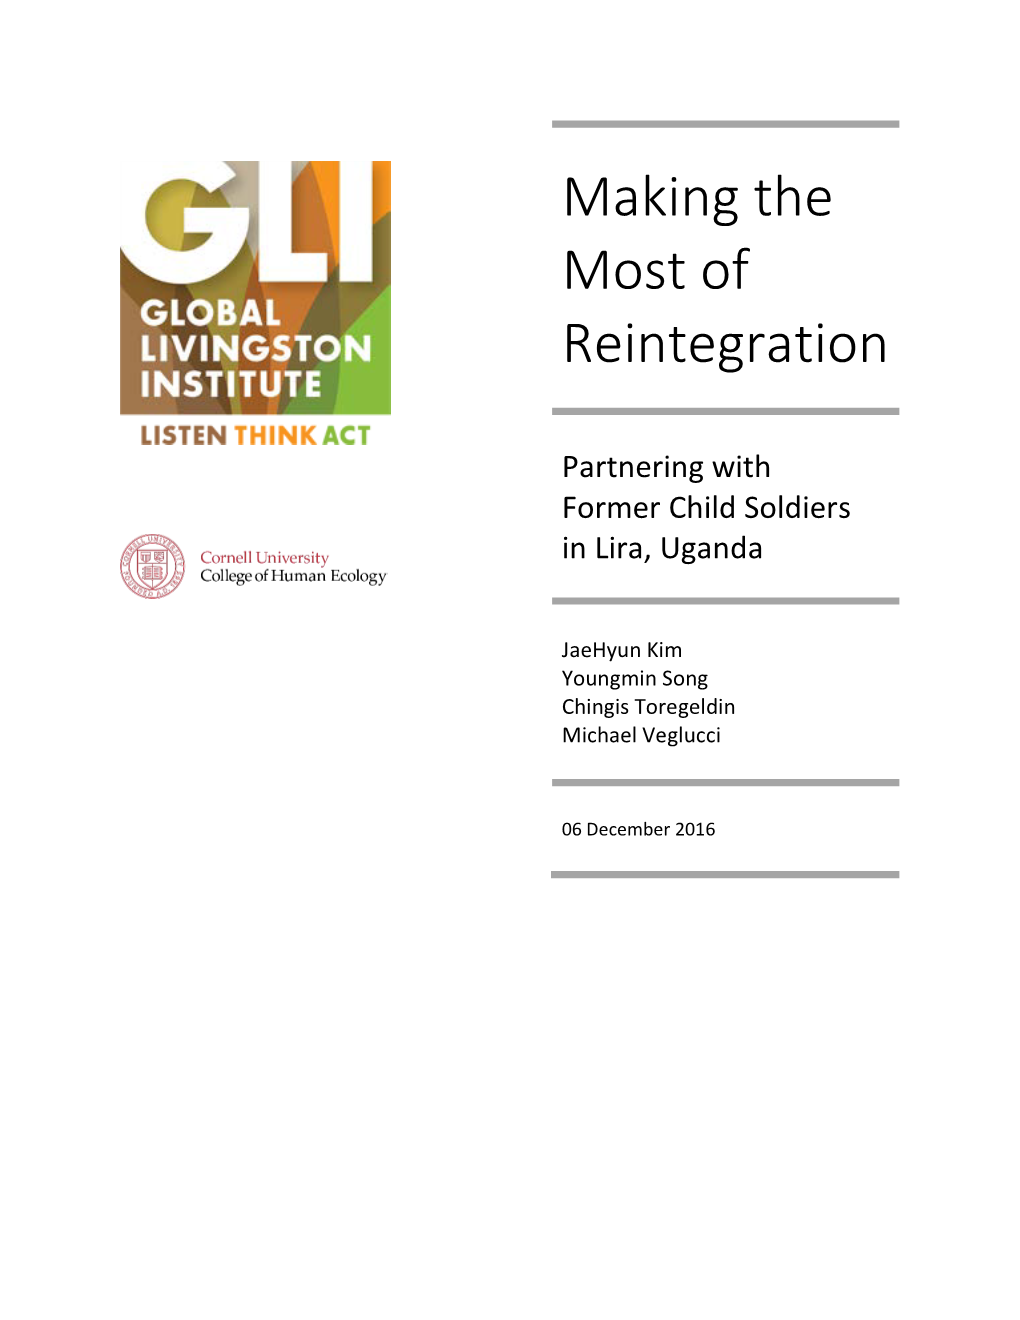 Making the Most of Reintegration